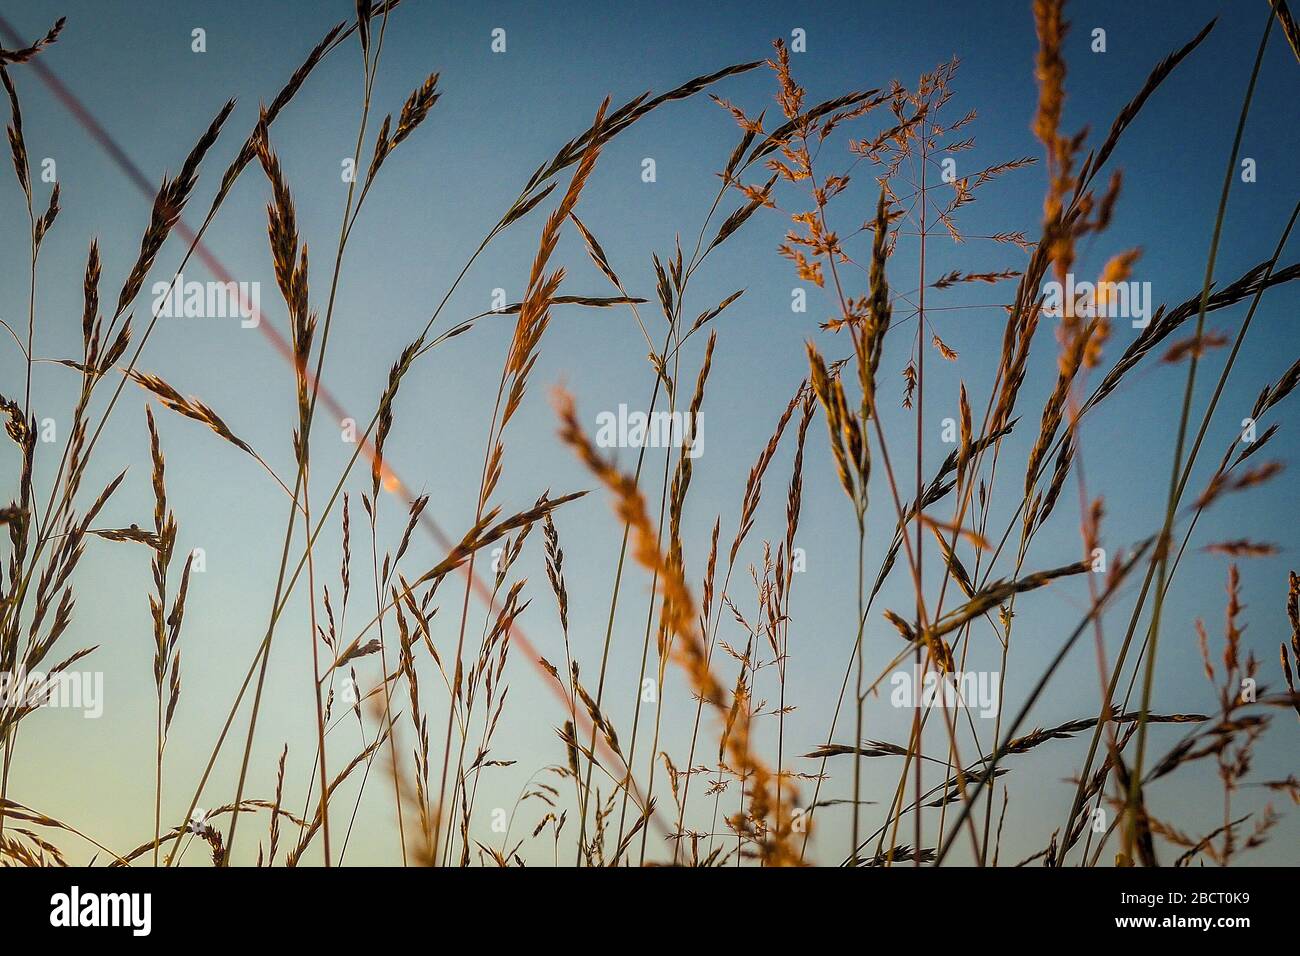 Grasses swaying in the evening breeze Stock Photo